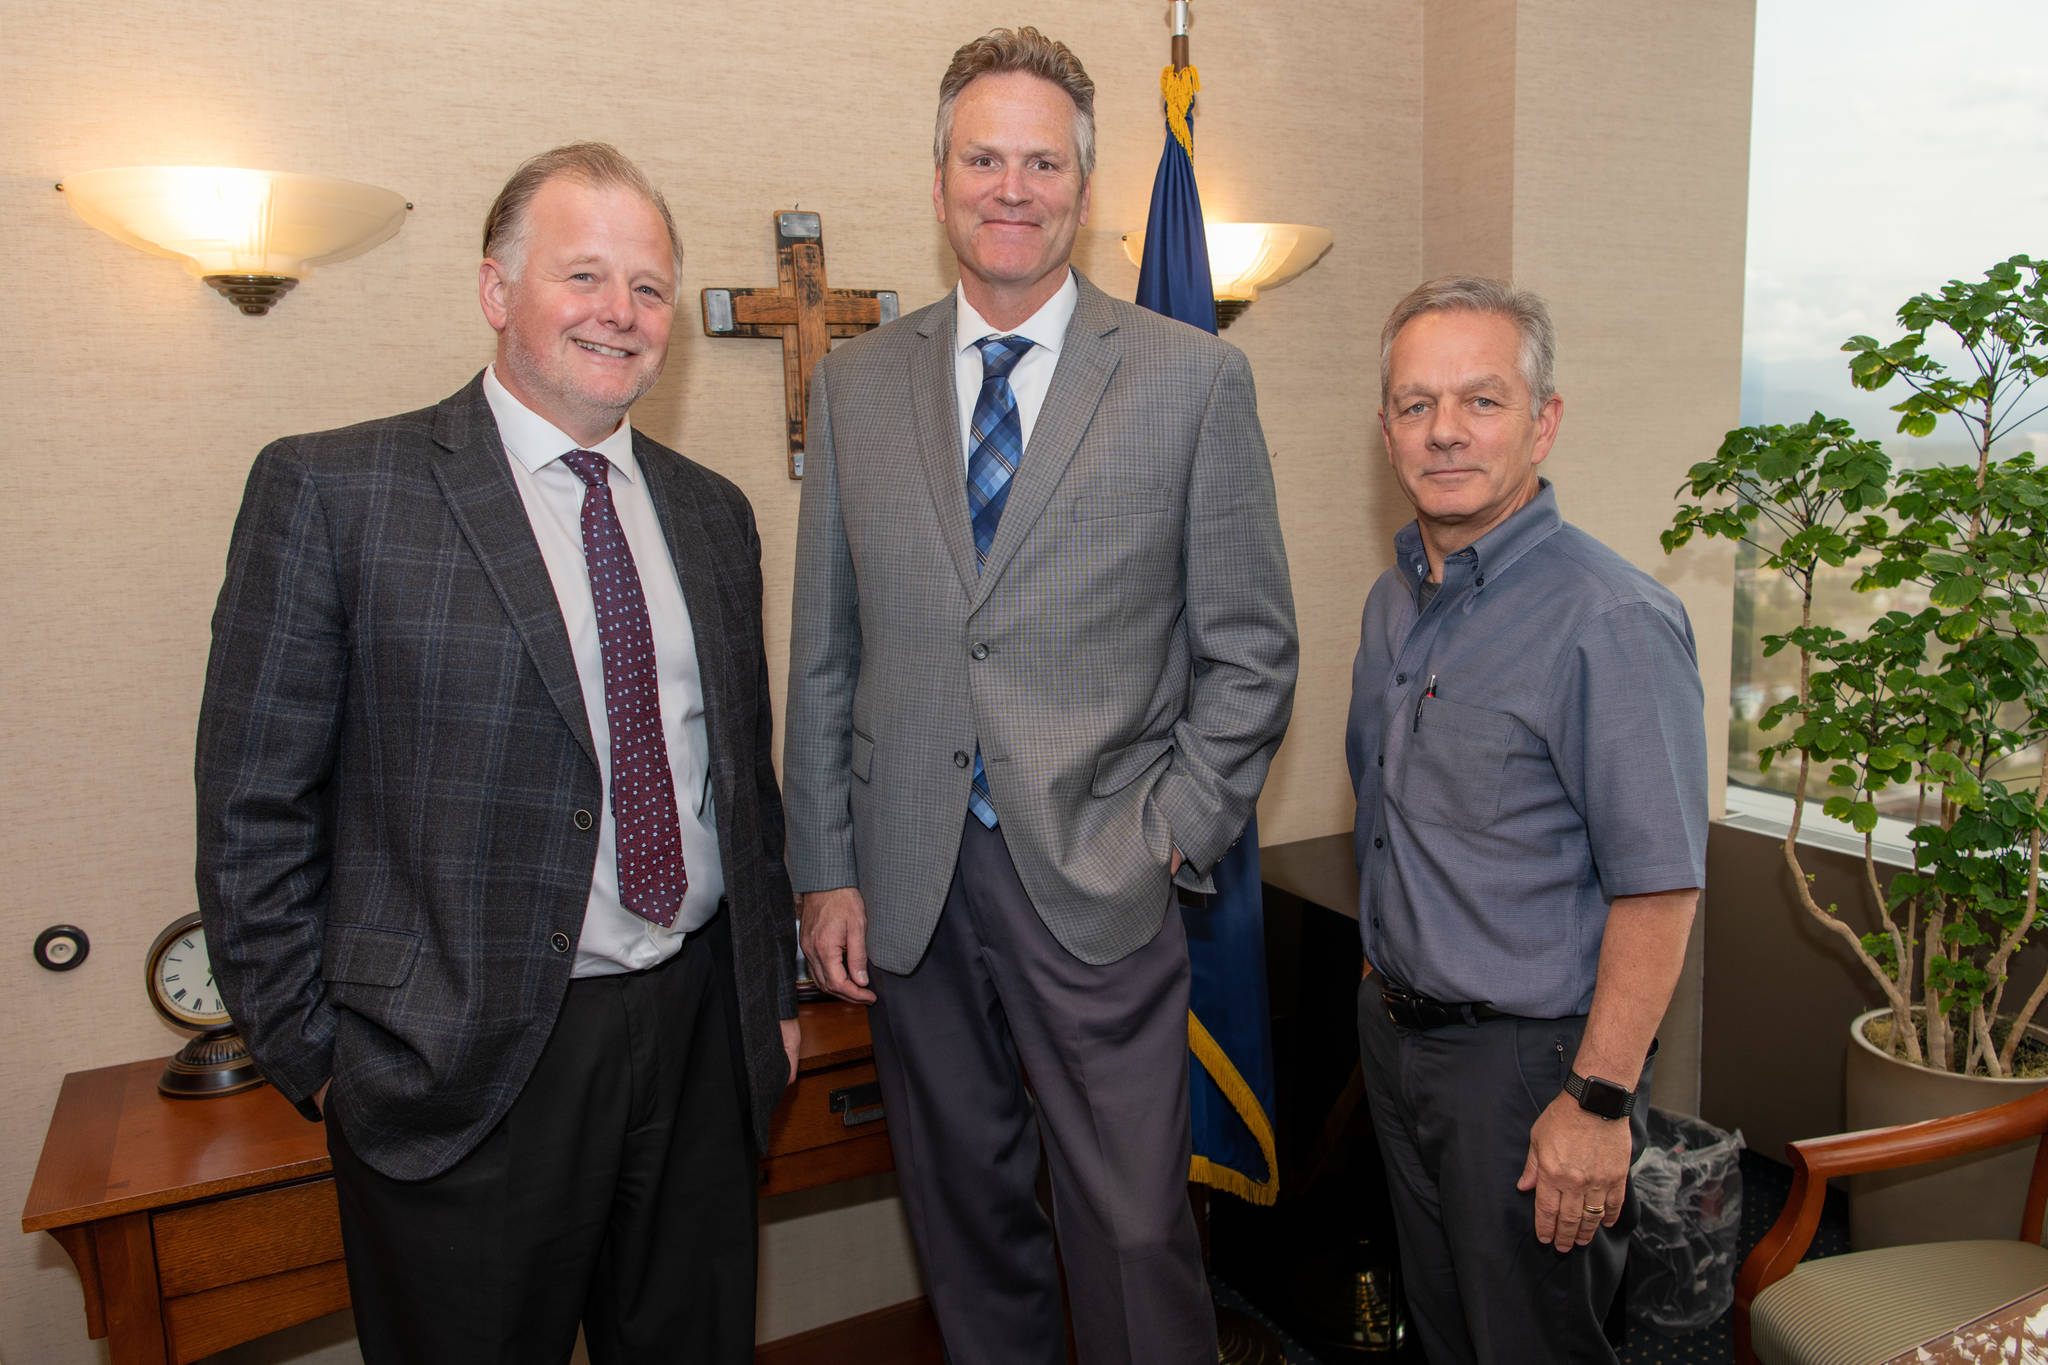 Alaska Governor Michael J. Dunleavy announced changes to his senior staff: Tuckerman Babcock will assume the role of Senior Policy Advisor for Strategic Affairs and Ben Stevens will become the Governor’s new Chief of Staff, Wednesday, July 31, 2019 in Anchorage, Alaska. (Photo courtesy of Matt Shuckerow/State of Alaska)